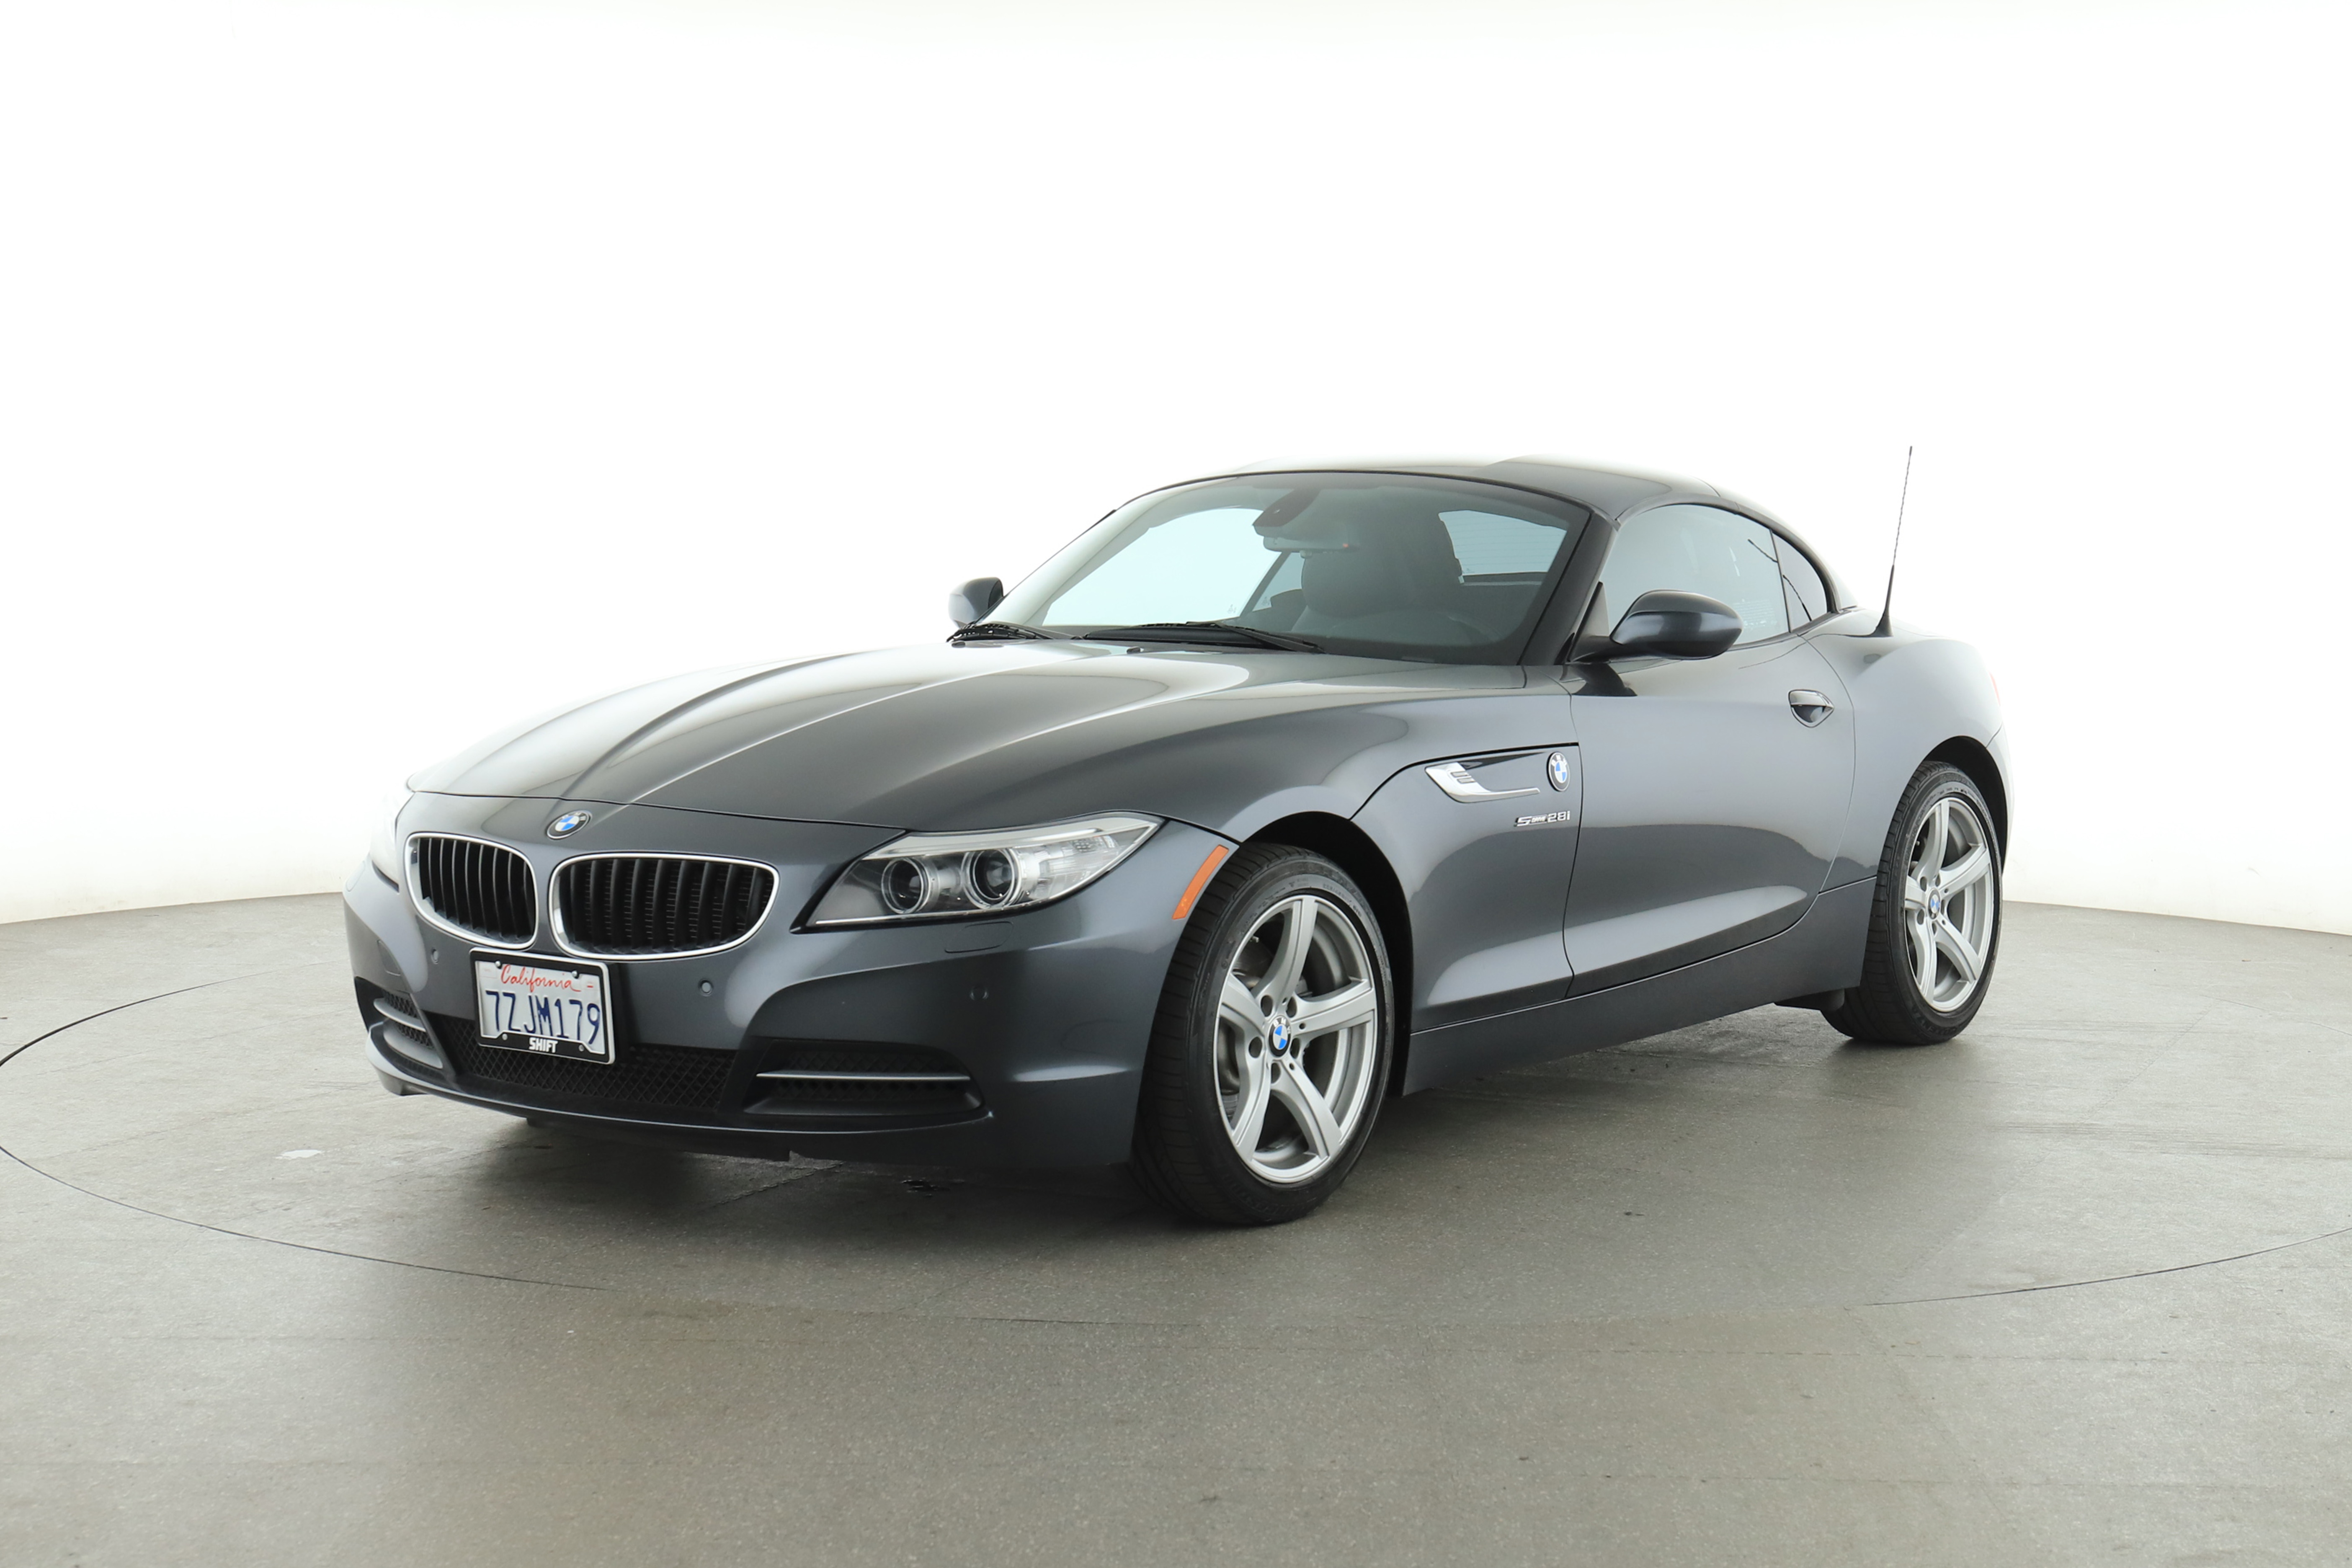 Used BMW Z4 for Sale | Shift